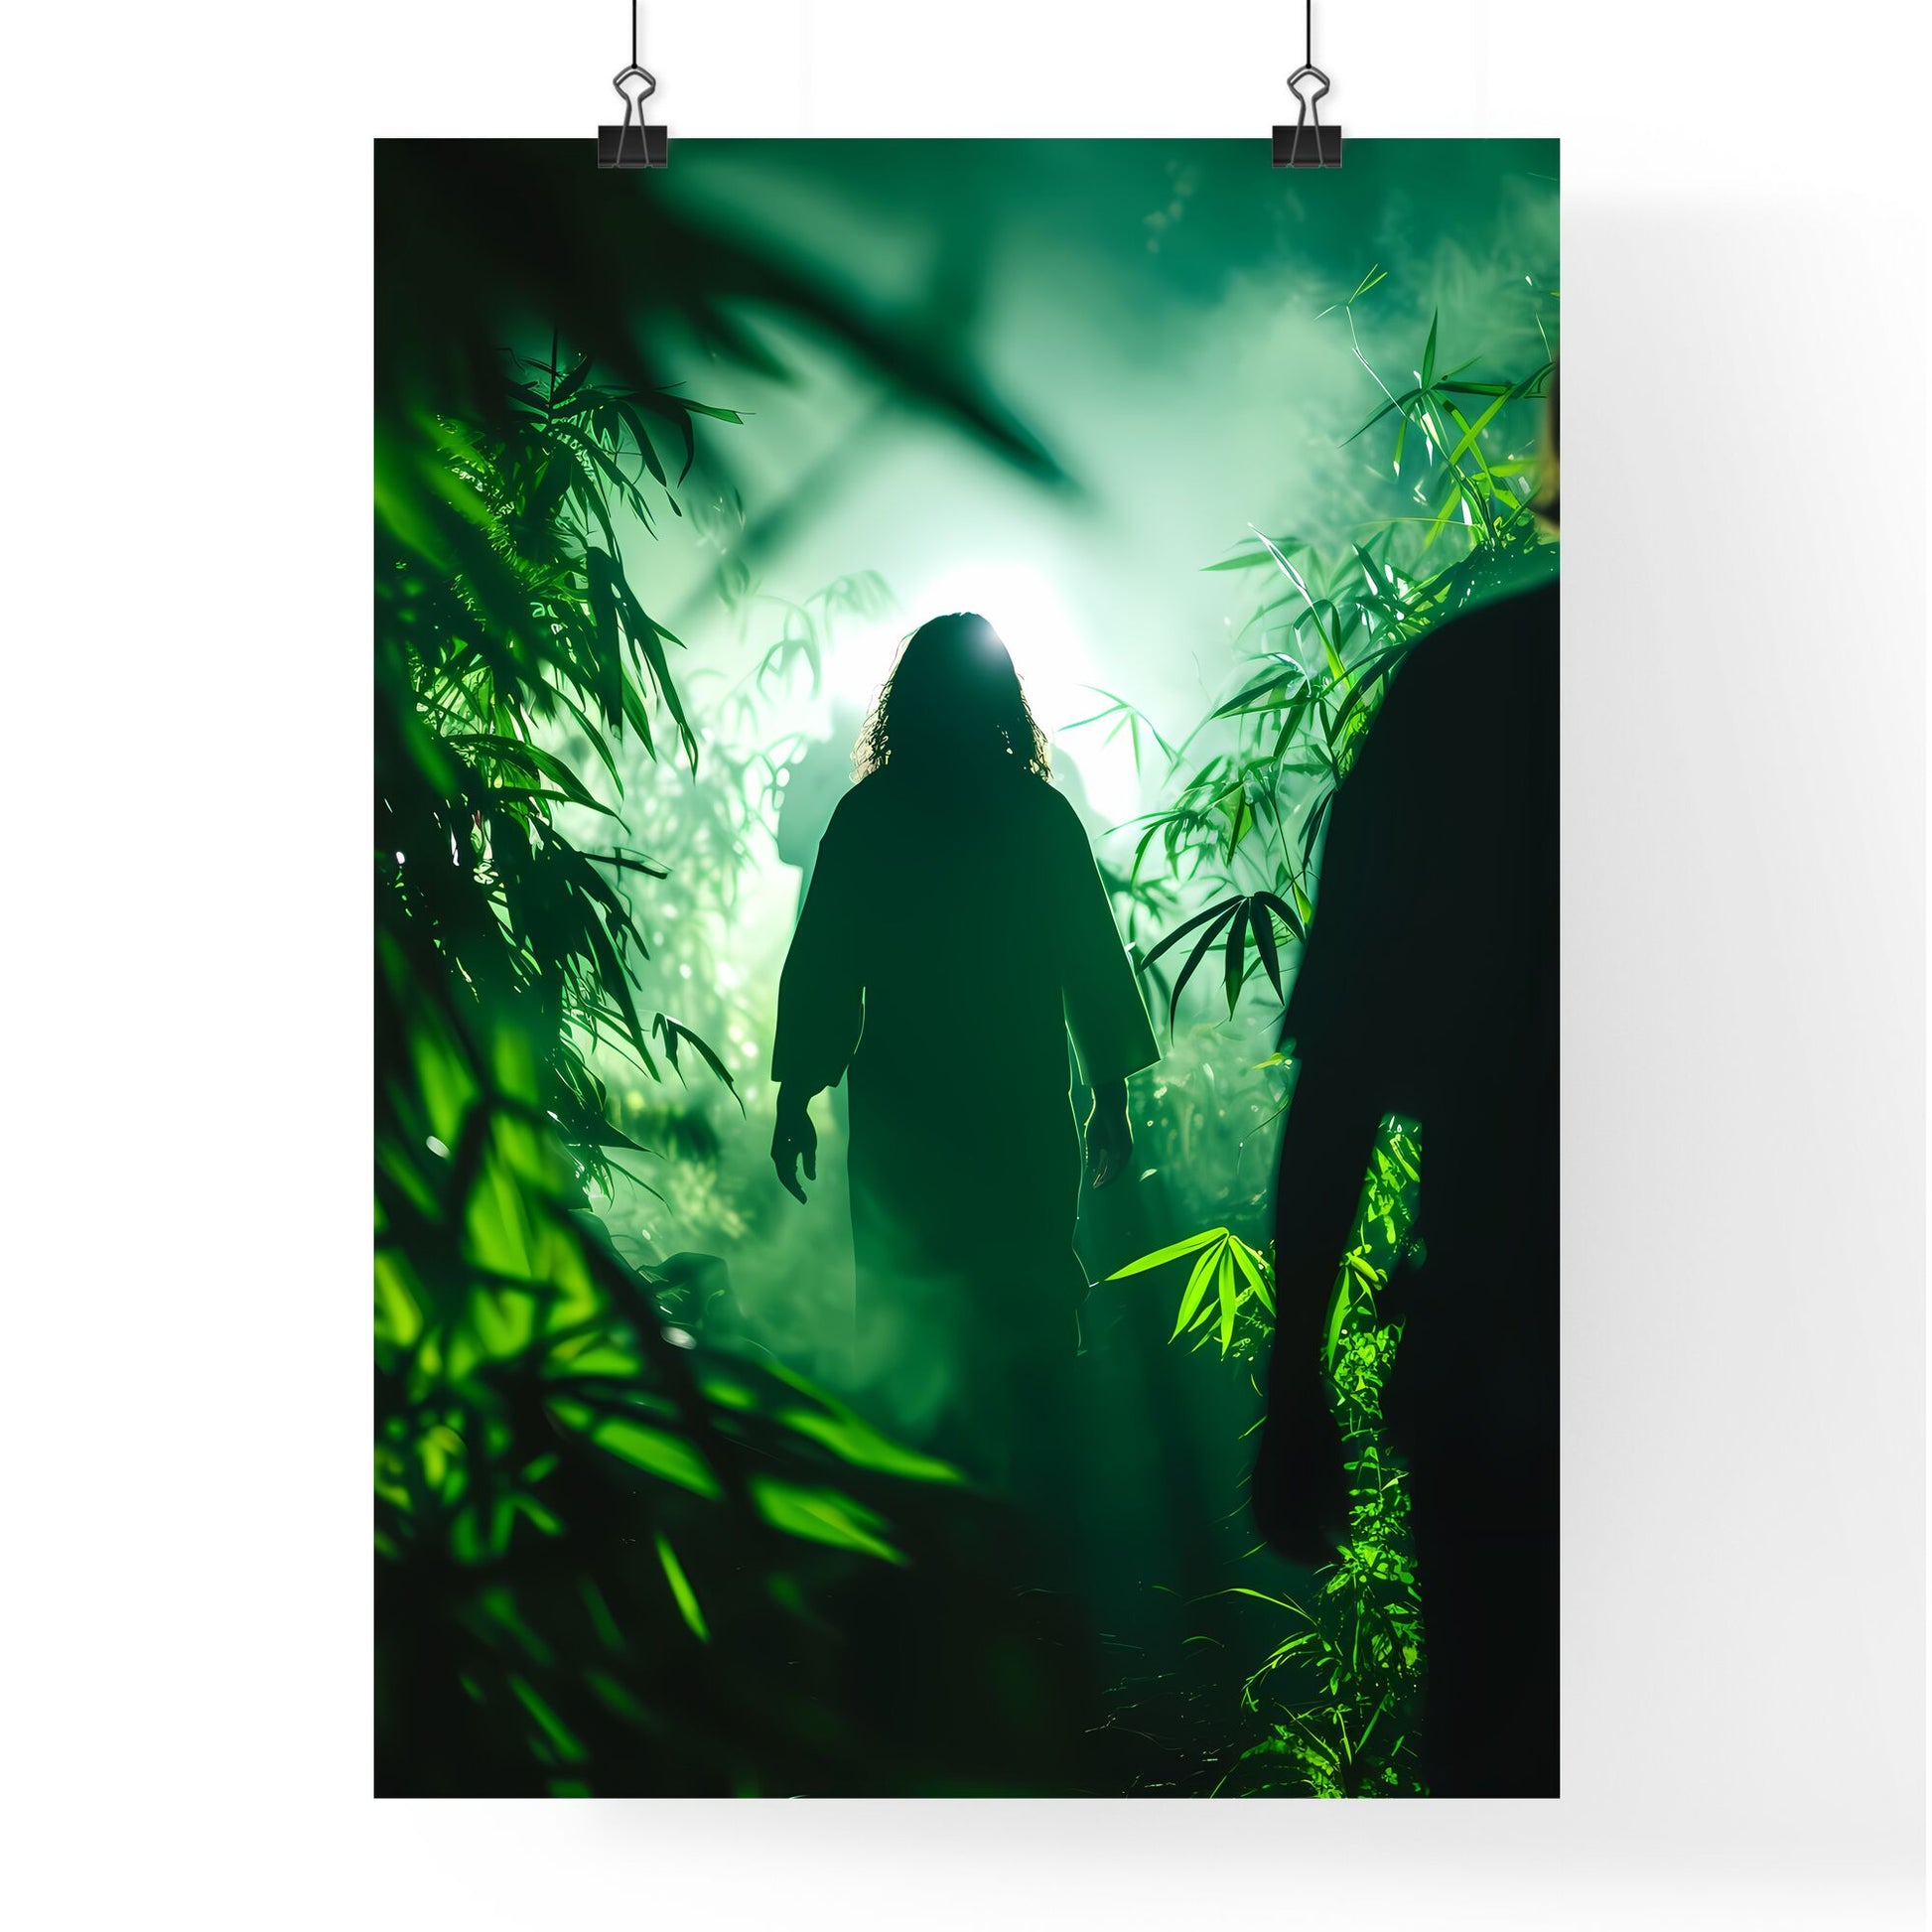 Heroes of the Christian faith, martyrs who gave their lives - Art print of a person standing in a forest Default Title